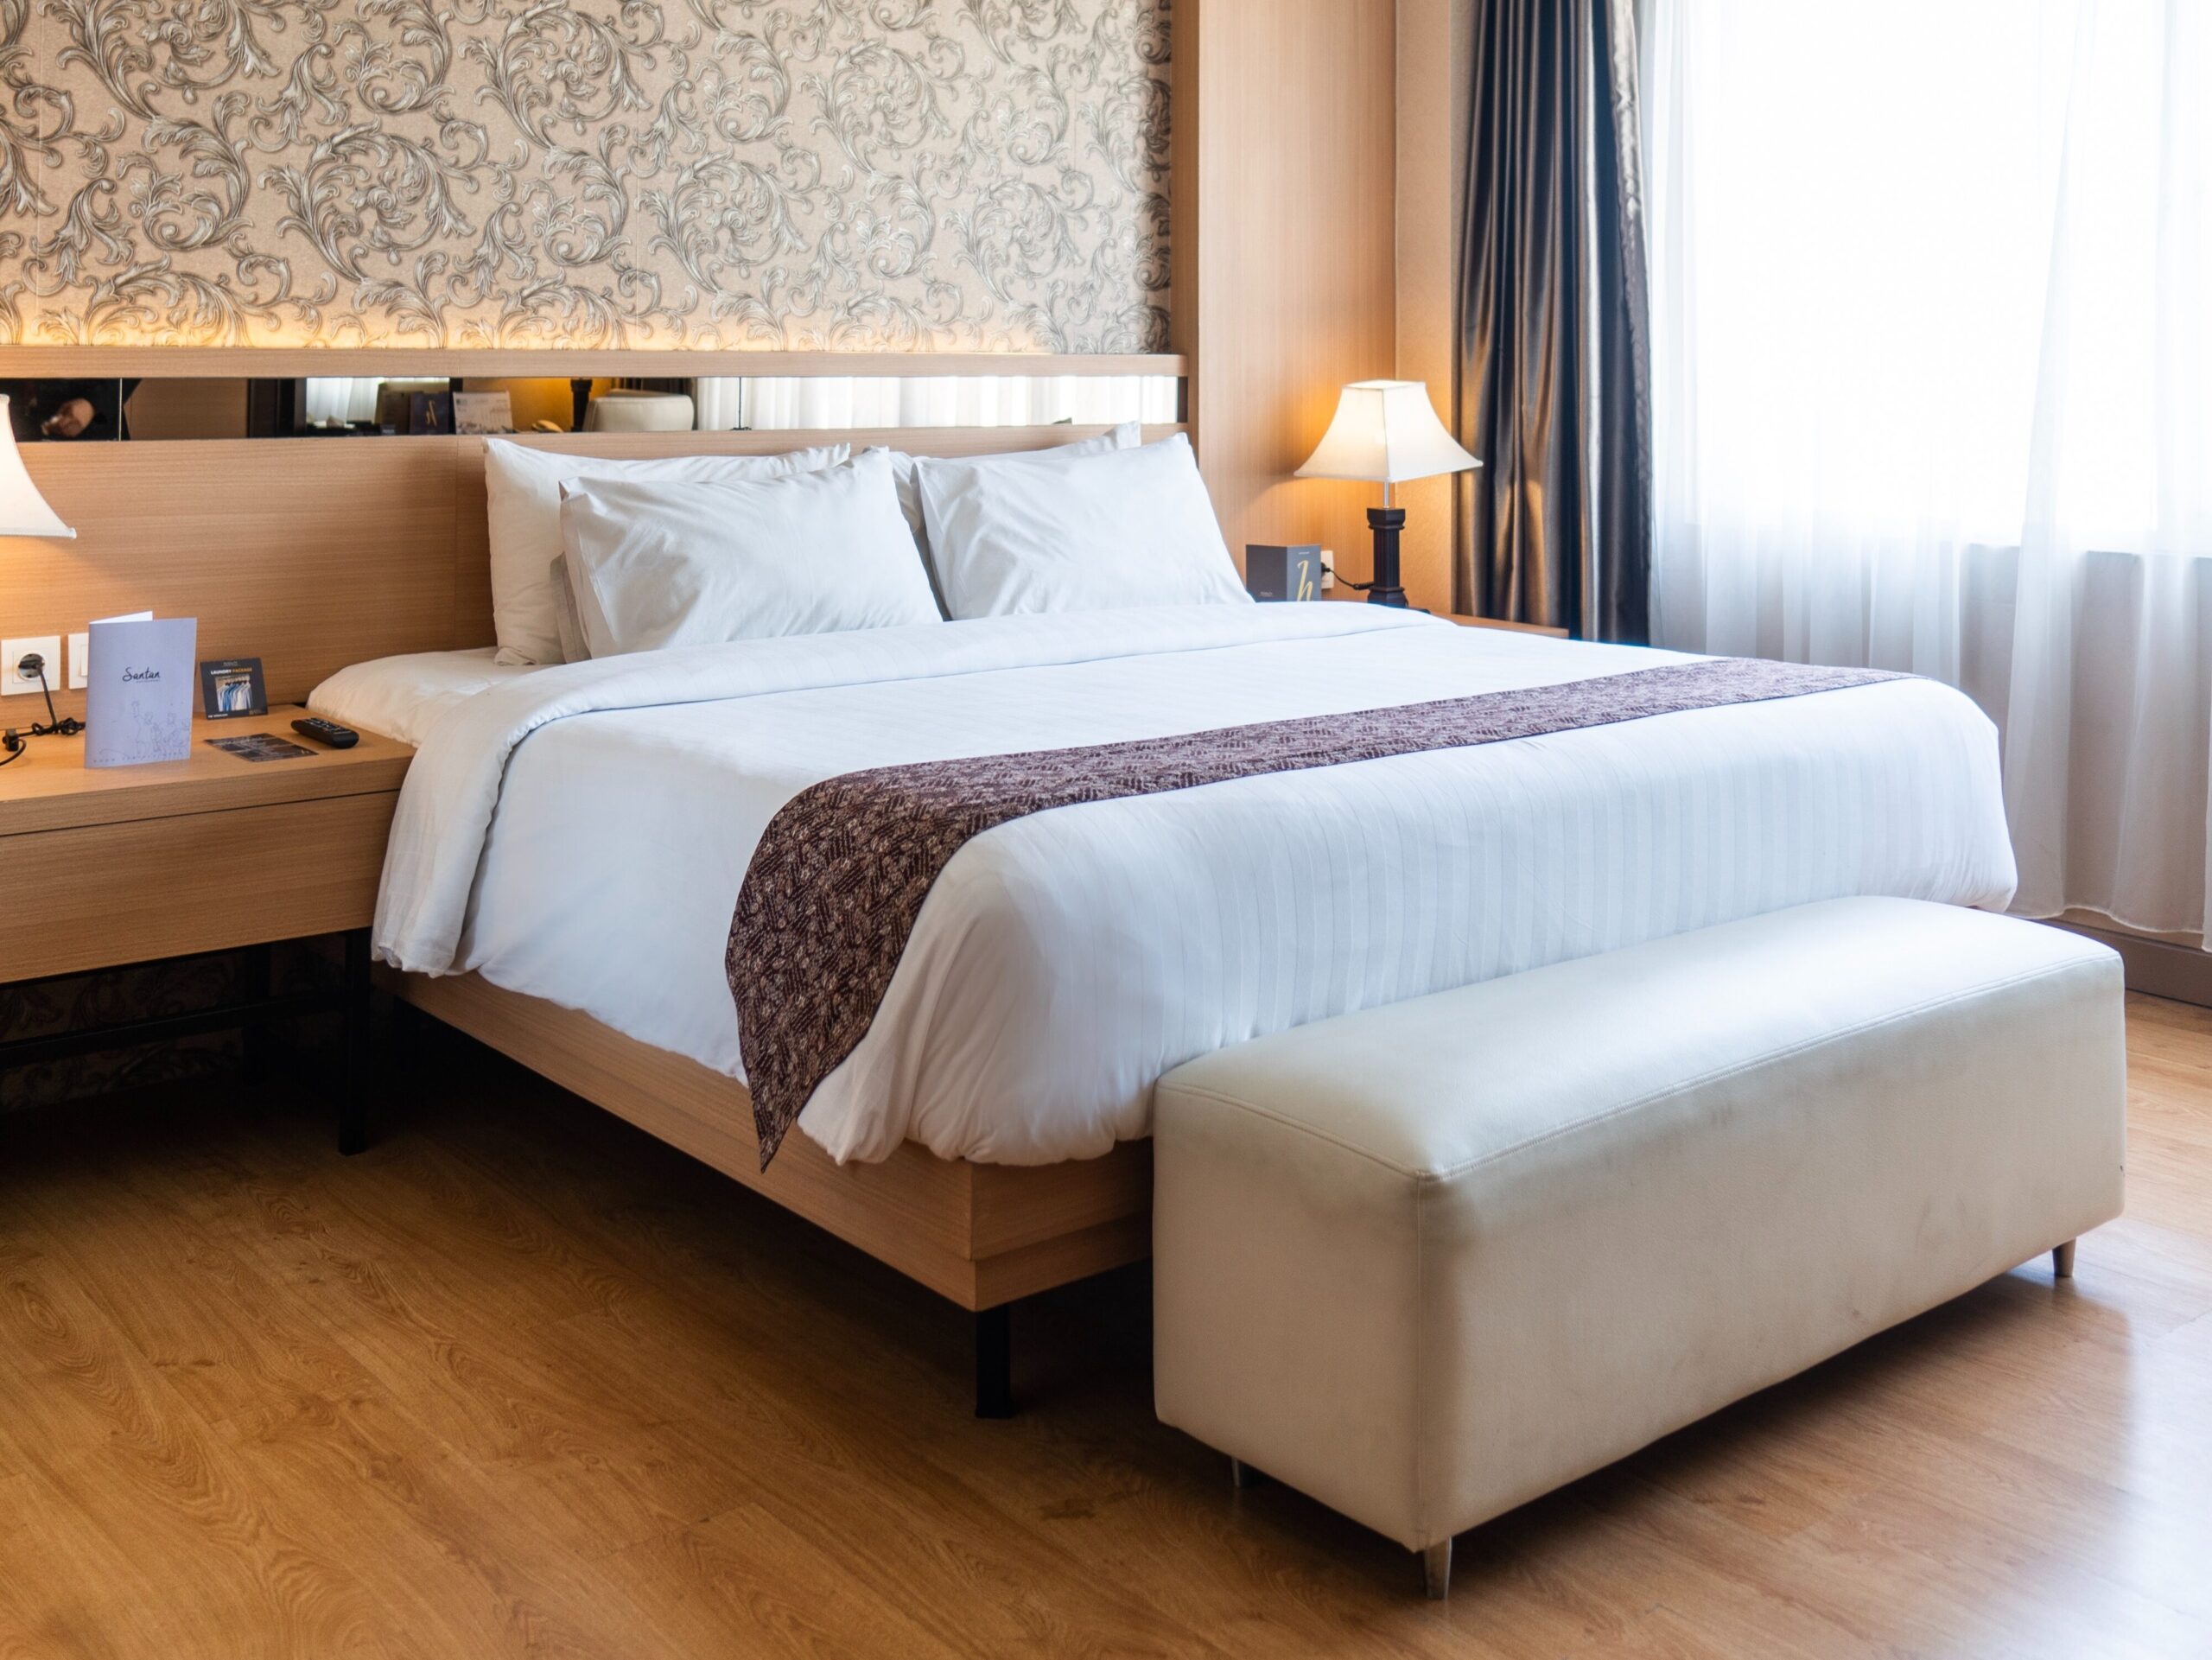 Hotel Room for Business Travel Guests - safe and secure